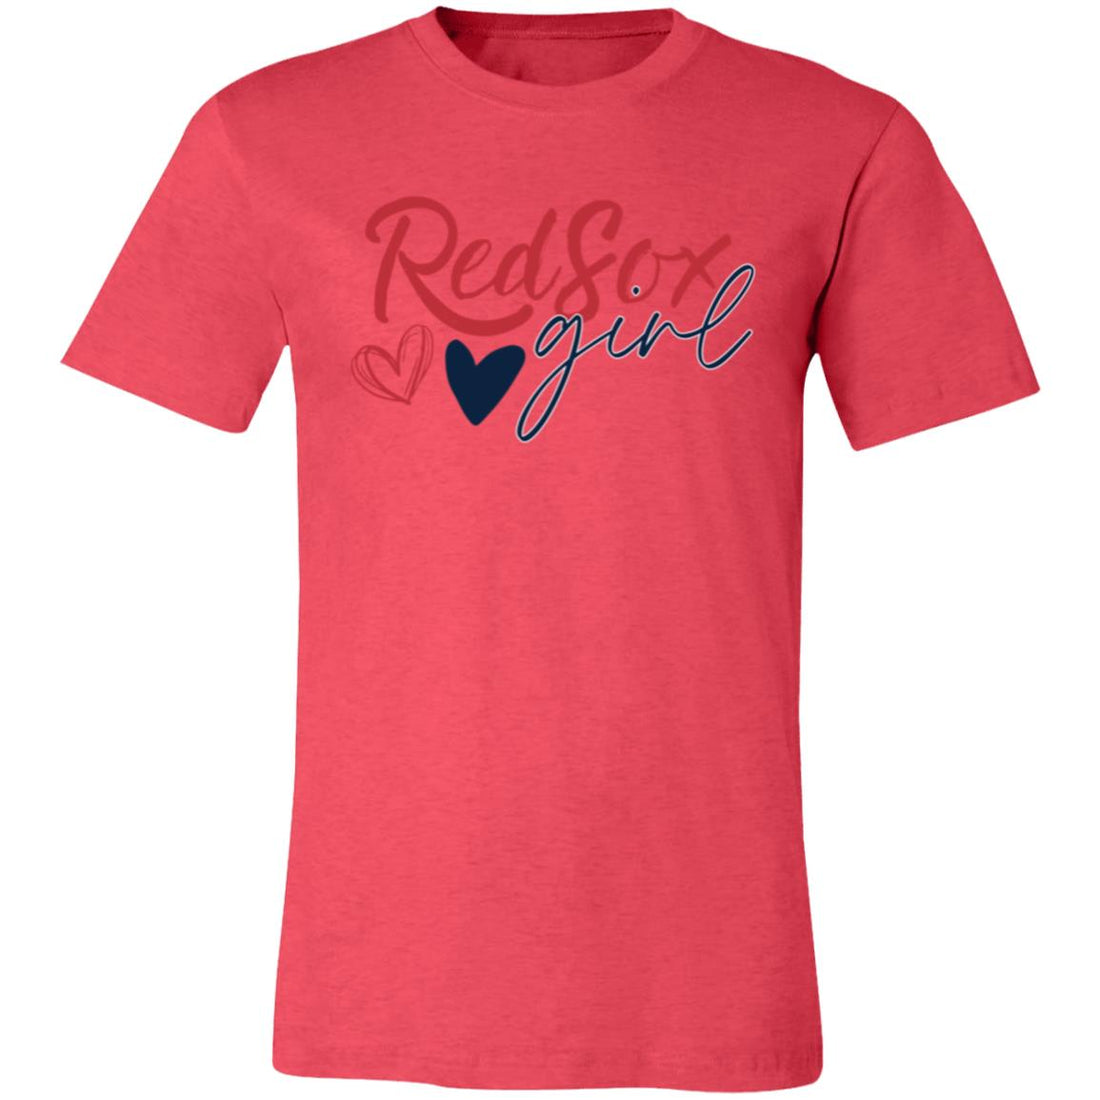 Red Sox Girl T-Shirt - T-Shirts - Positively Sassy - Red Sox Girl T-Shirt